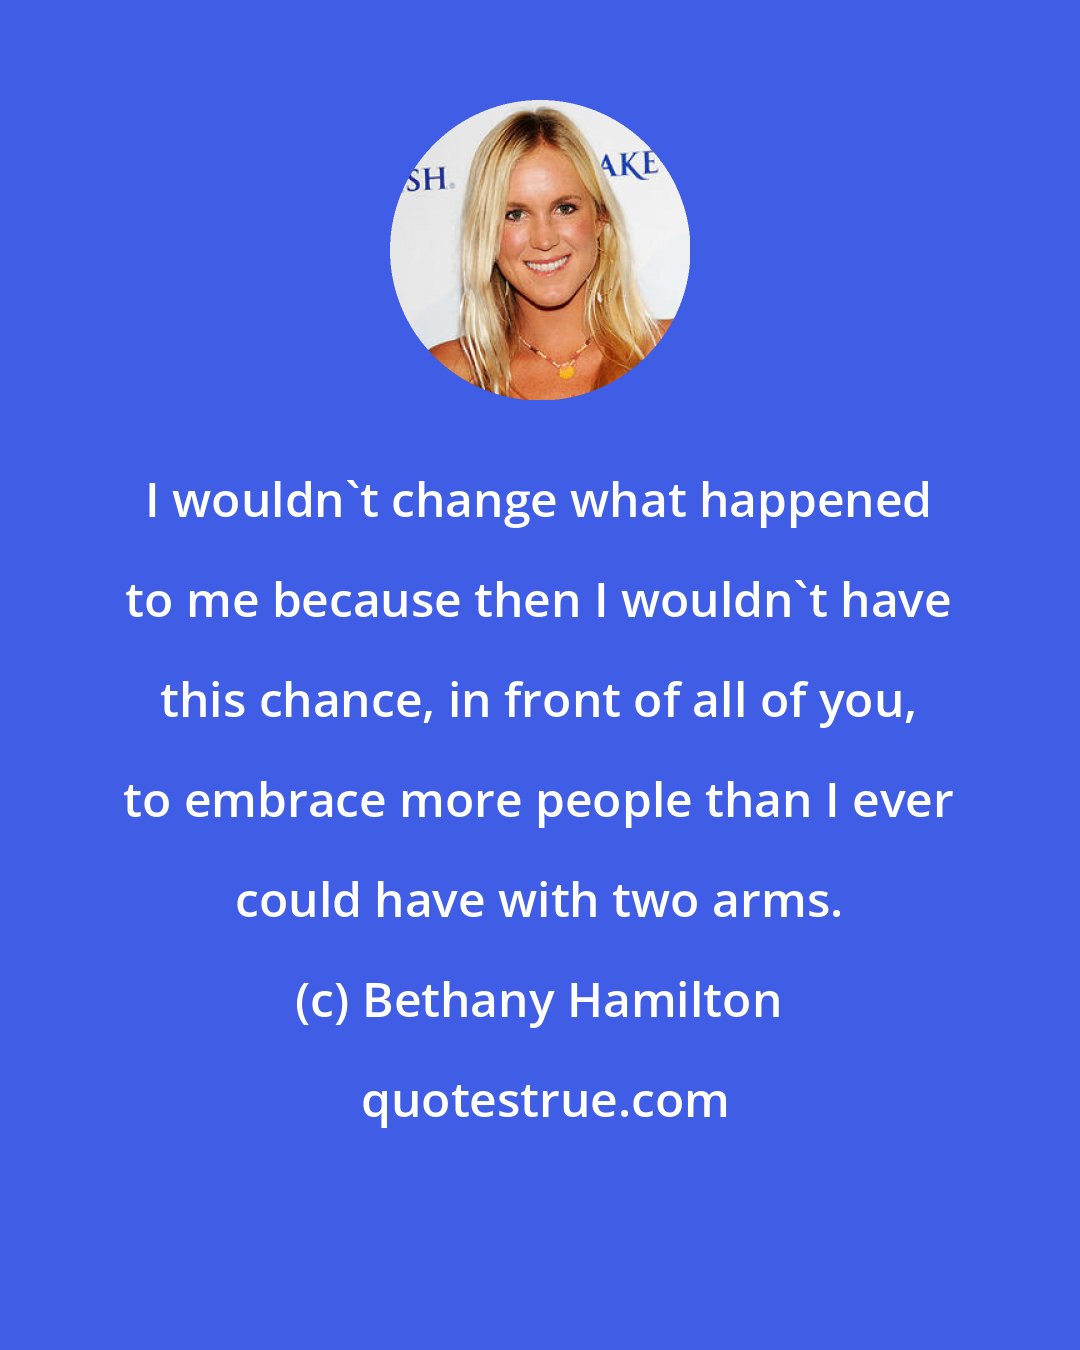 Bethany Hamilton: I wouldn't change what happened to me because then I wouldn't have this chance, in front of all of you, to embrace more people than I ever could have with two arms.